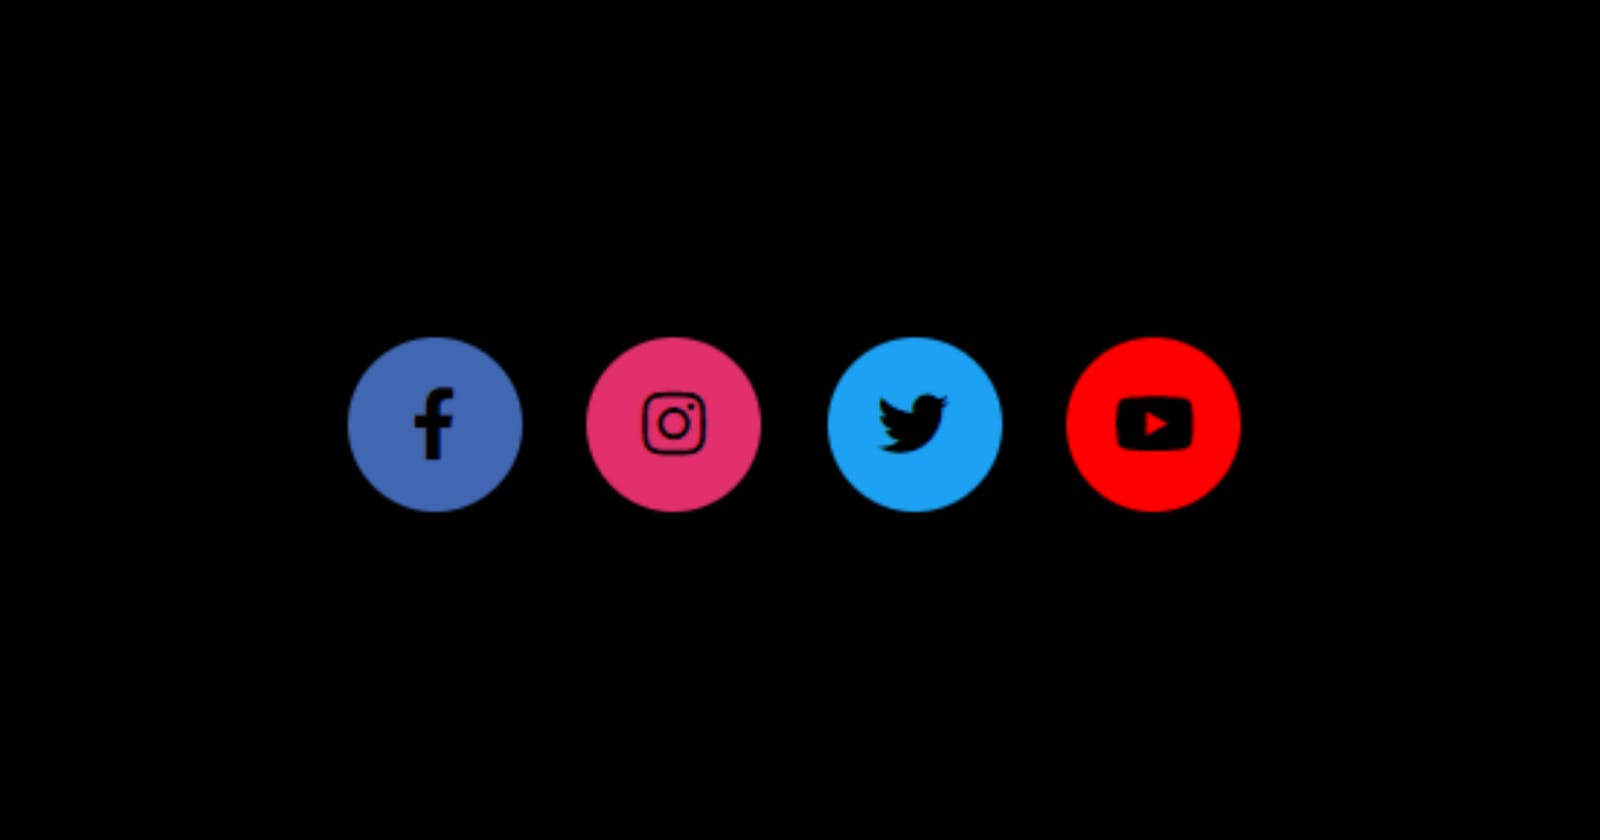 Awesome Social Media icons Hover/Effect using CSS